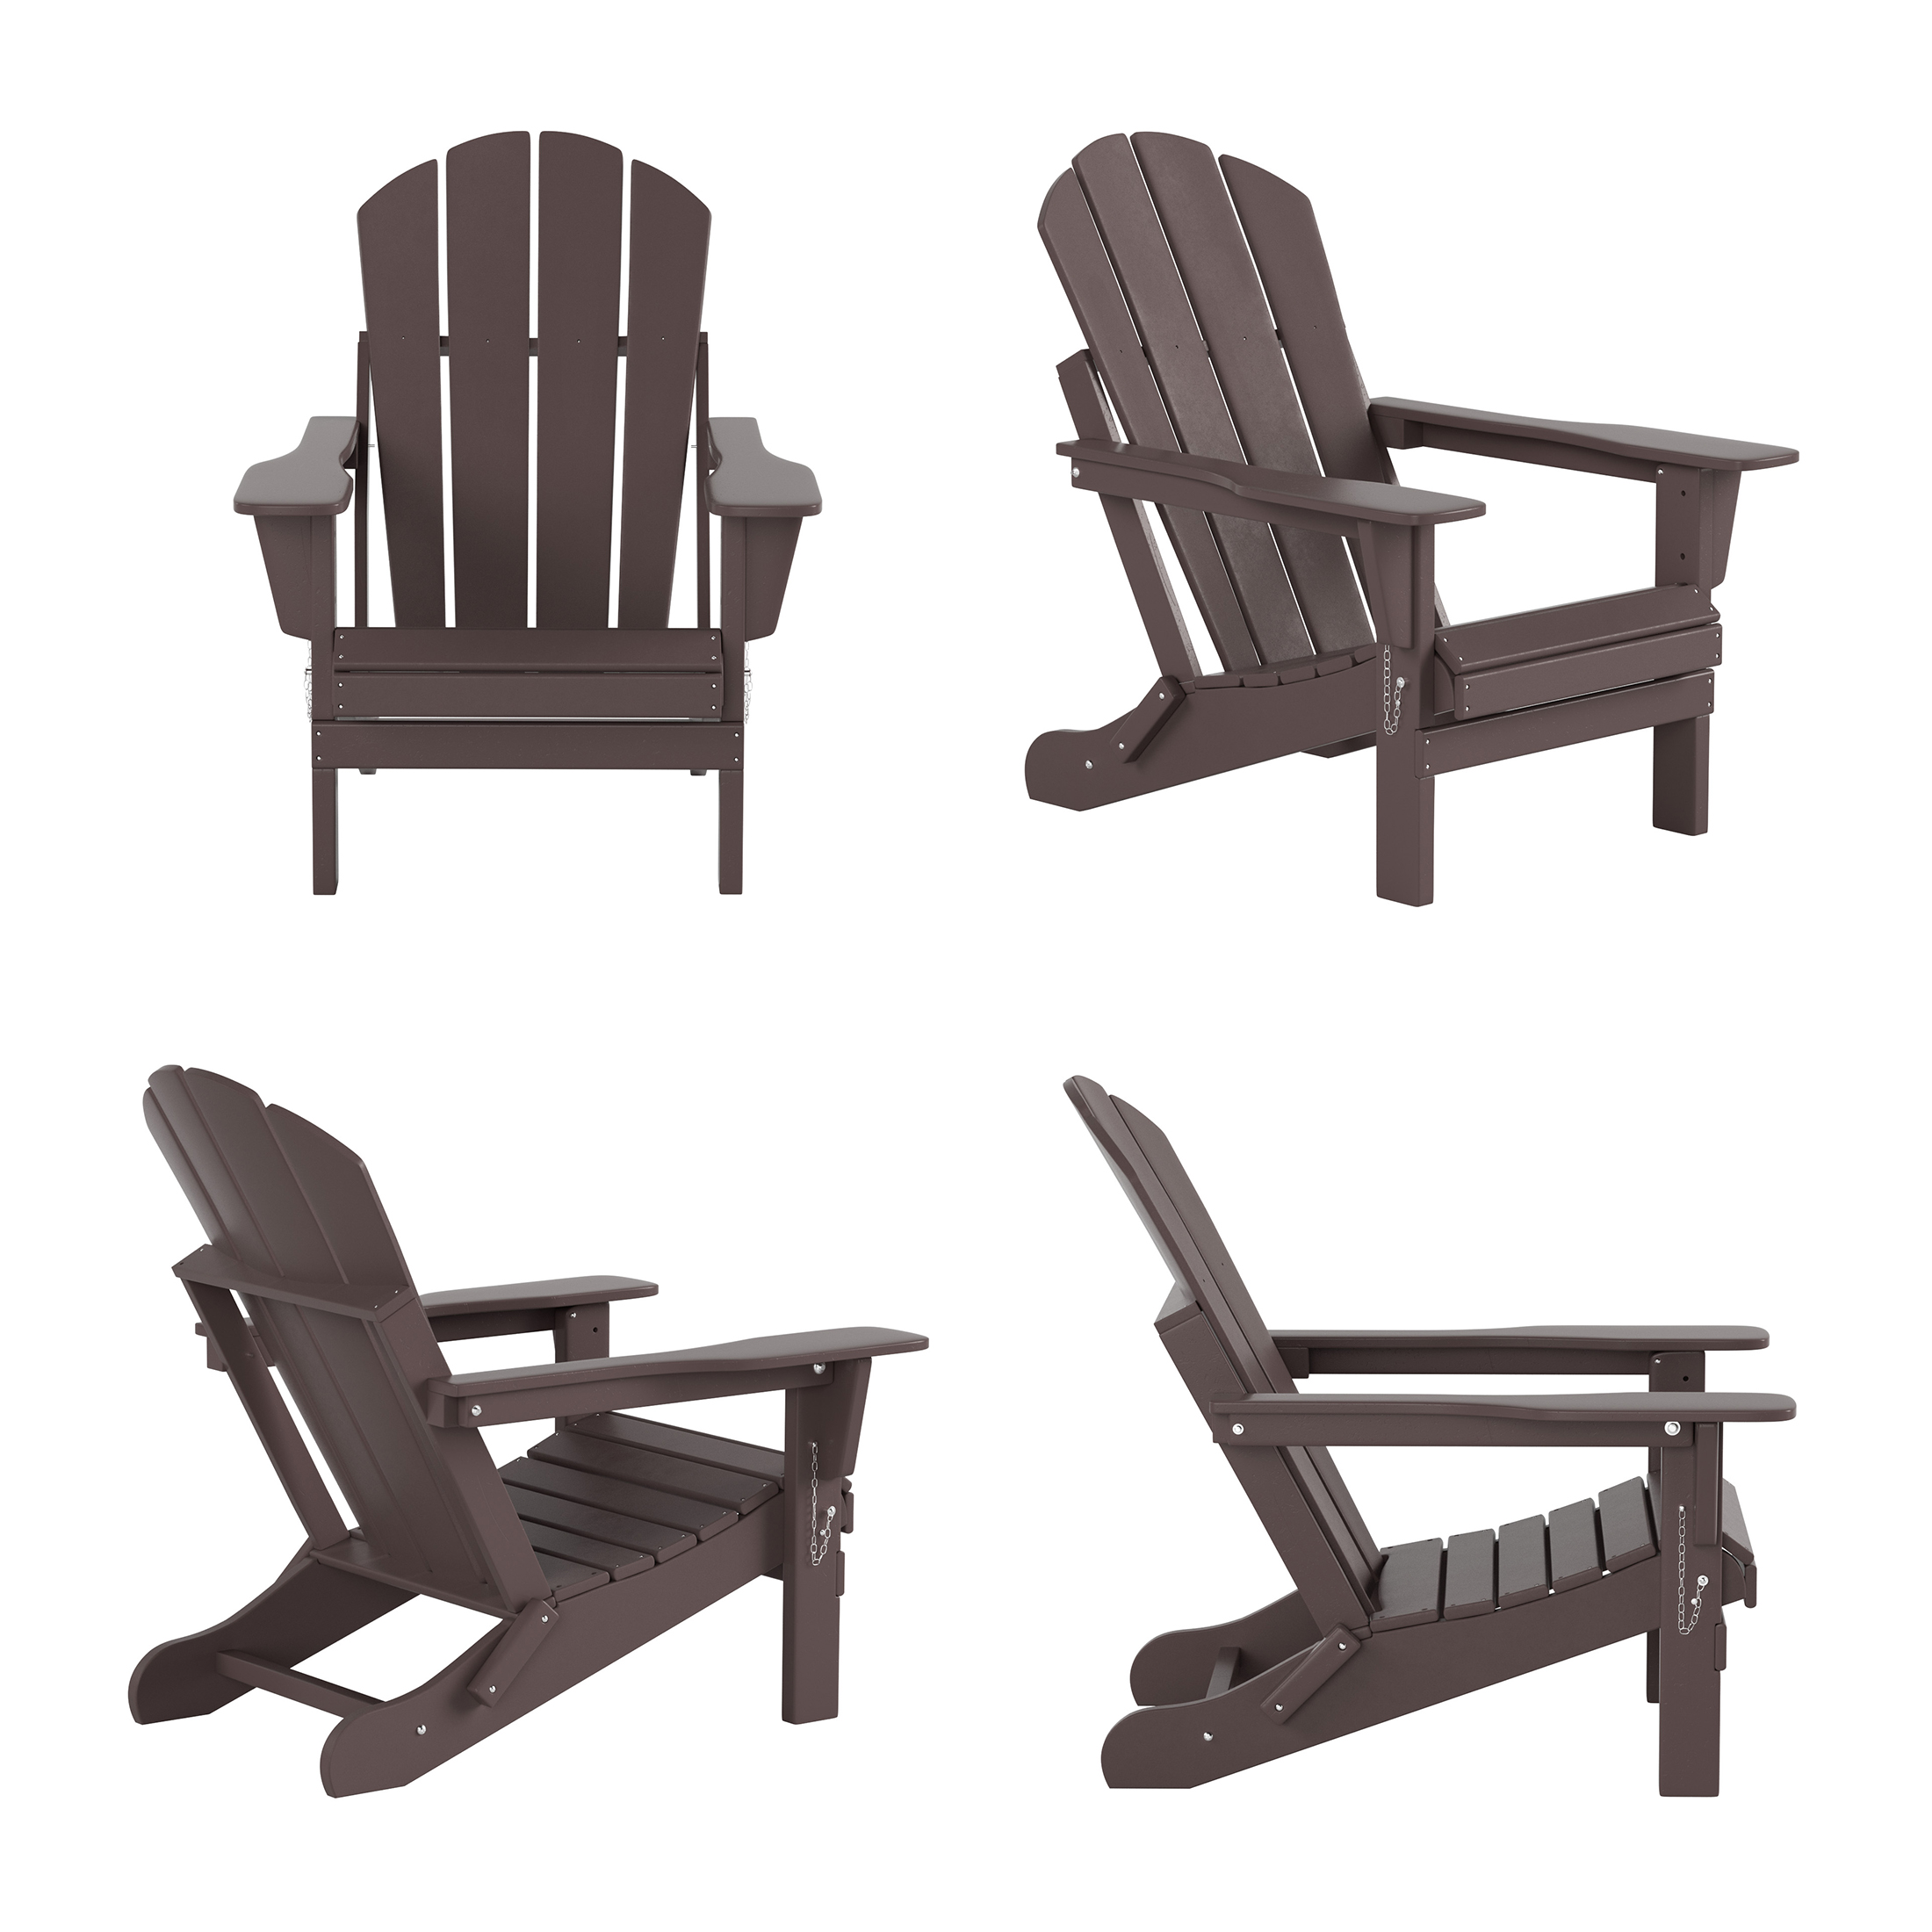 WestinTrends Malibu Outdoor Lounge Chairs, 3-Pieces Adirondack Chair Set with Ottoman and Side Table, All Weather Poly Lumber Patio Lawn Folding Chair for Outside Pool Garden Backyard, Dark Brown - image 4 of 7